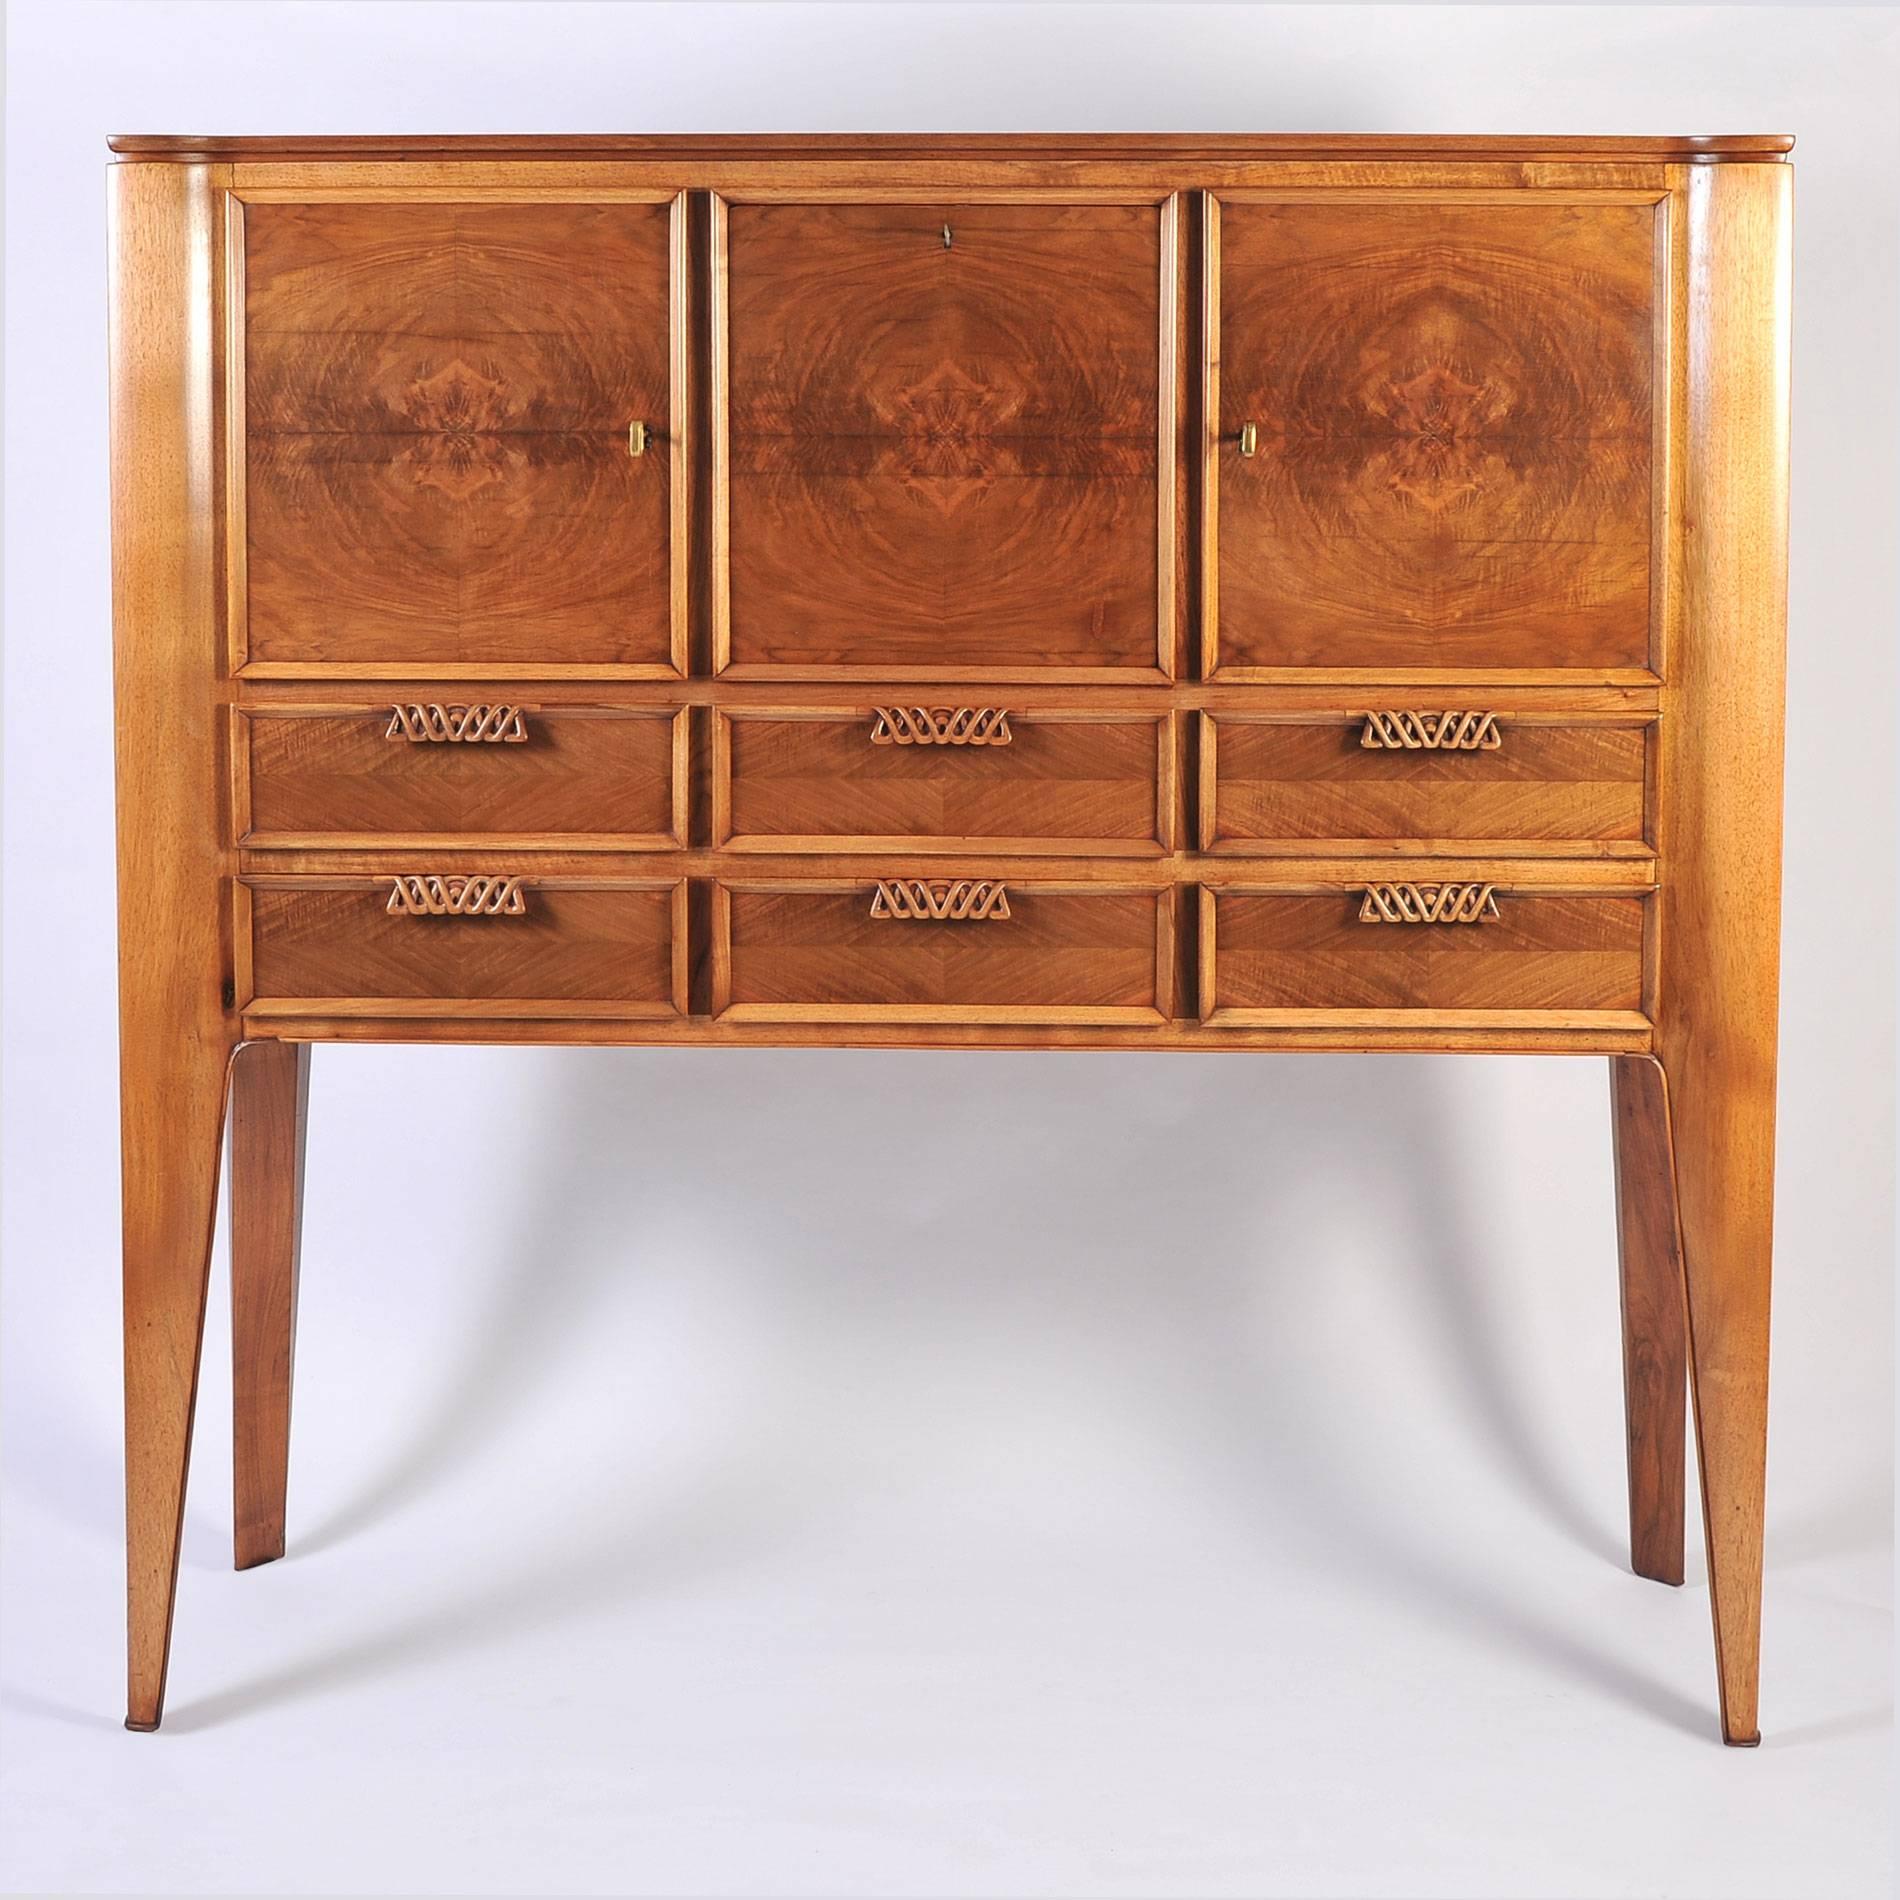 Beautifully carved walnut cabinet by Paolo Buffa. Features three upper cupboards with original keys (left and right cupboards open from the side, the middle cupboard opens downwards) and six lower drawers with decorative carved twisted handles.